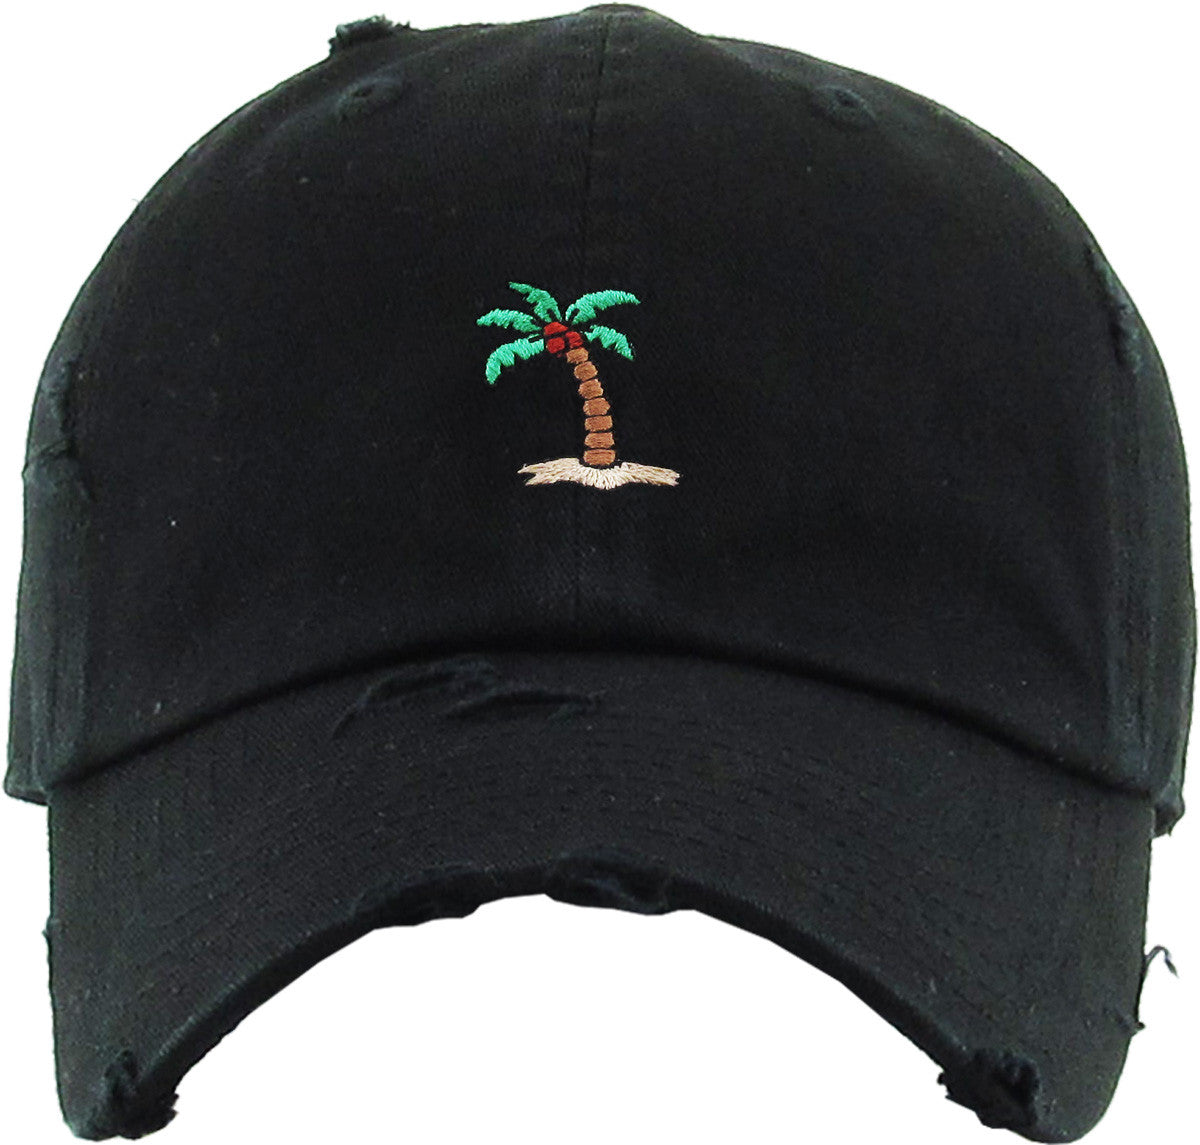 Vintage Dad Hat Palm Tree Embroidery, 44% OFF